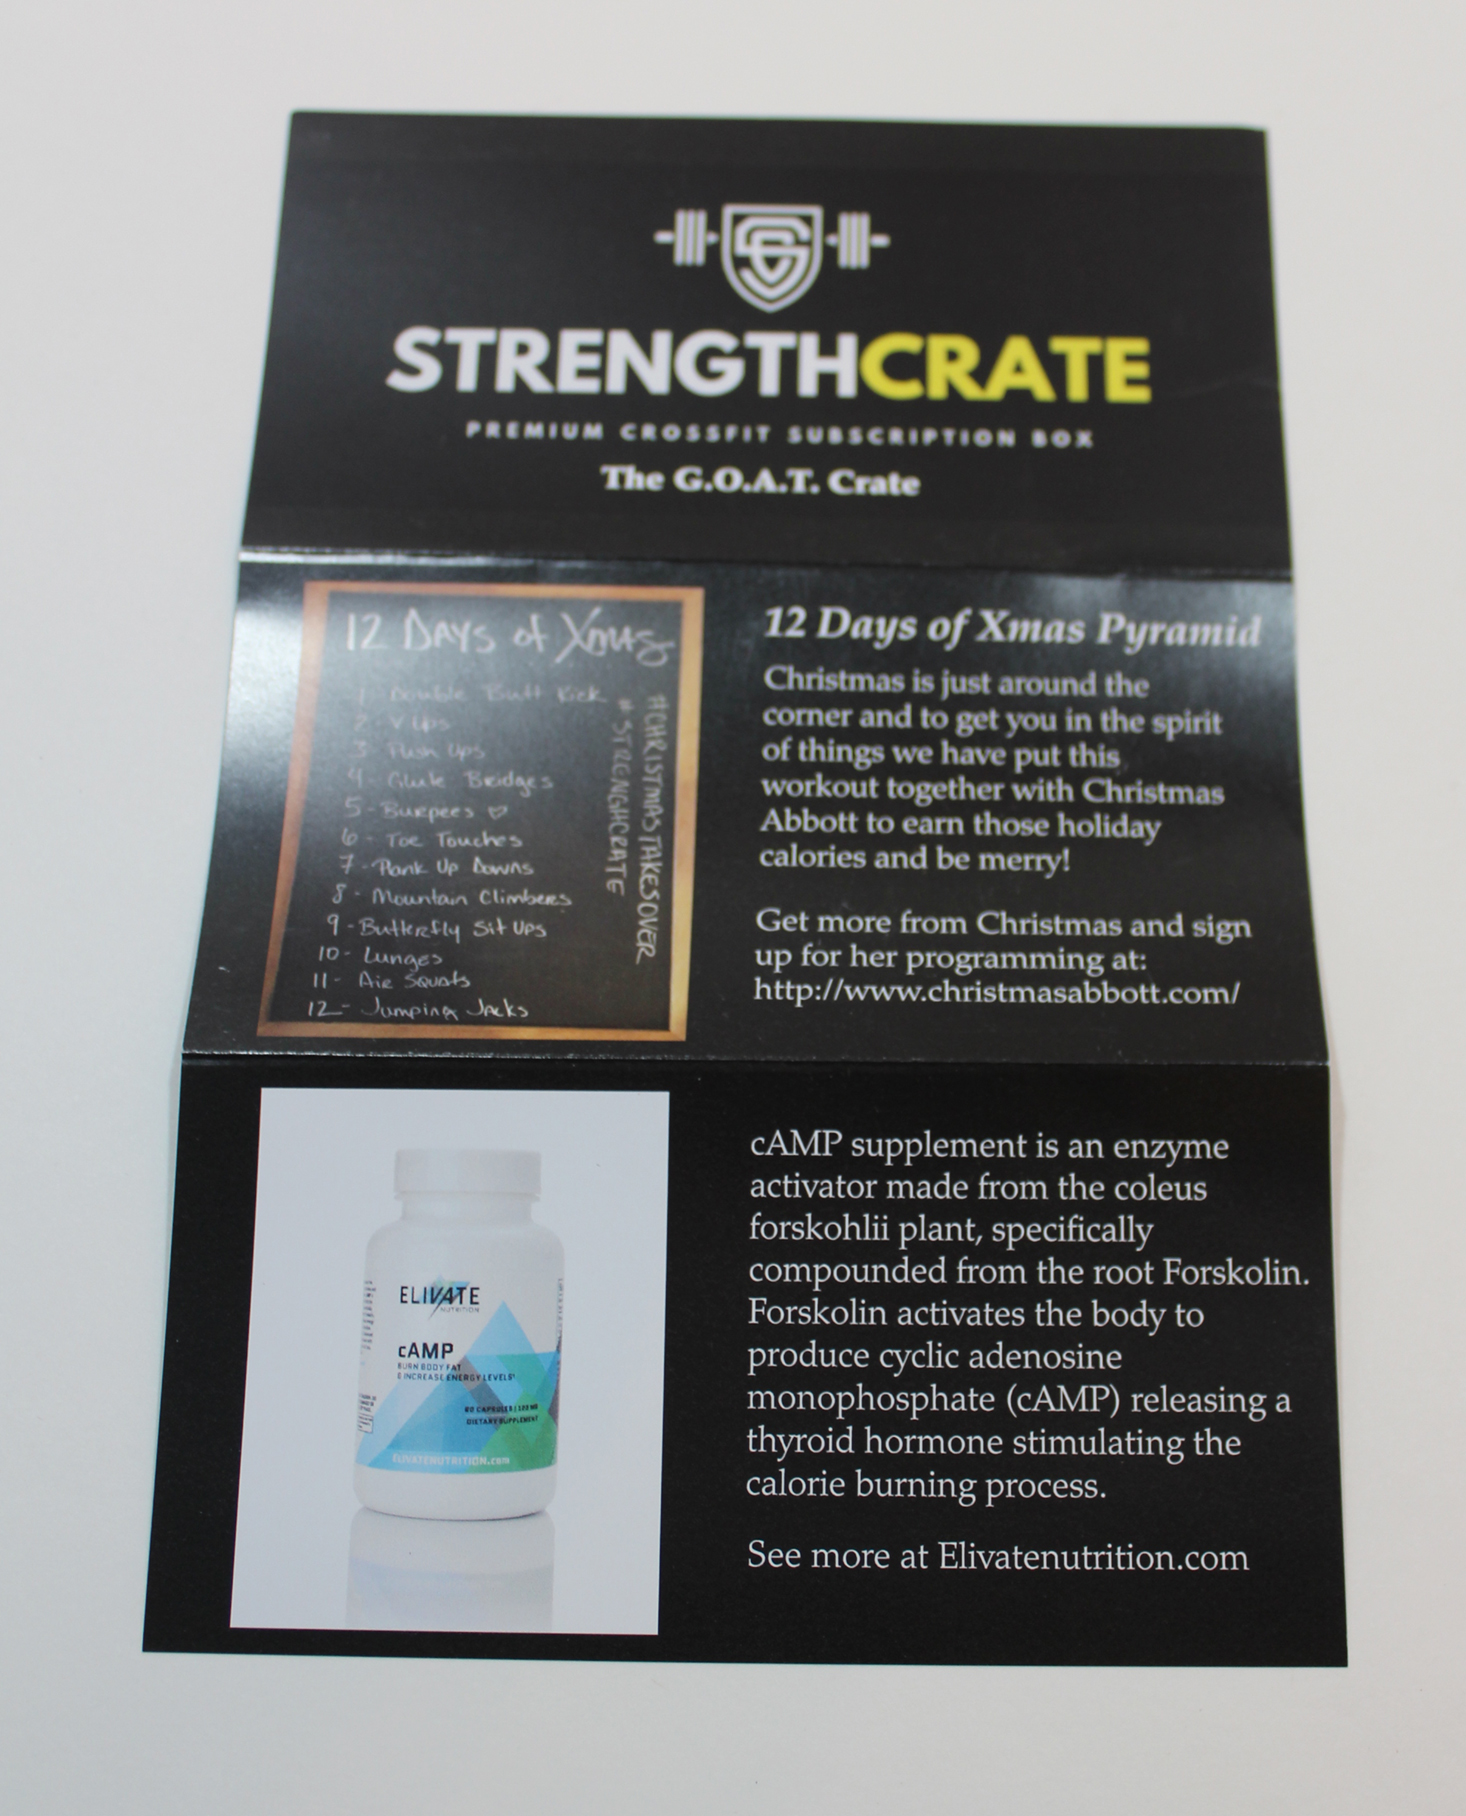 strength-crate-november-2016-booklet-front